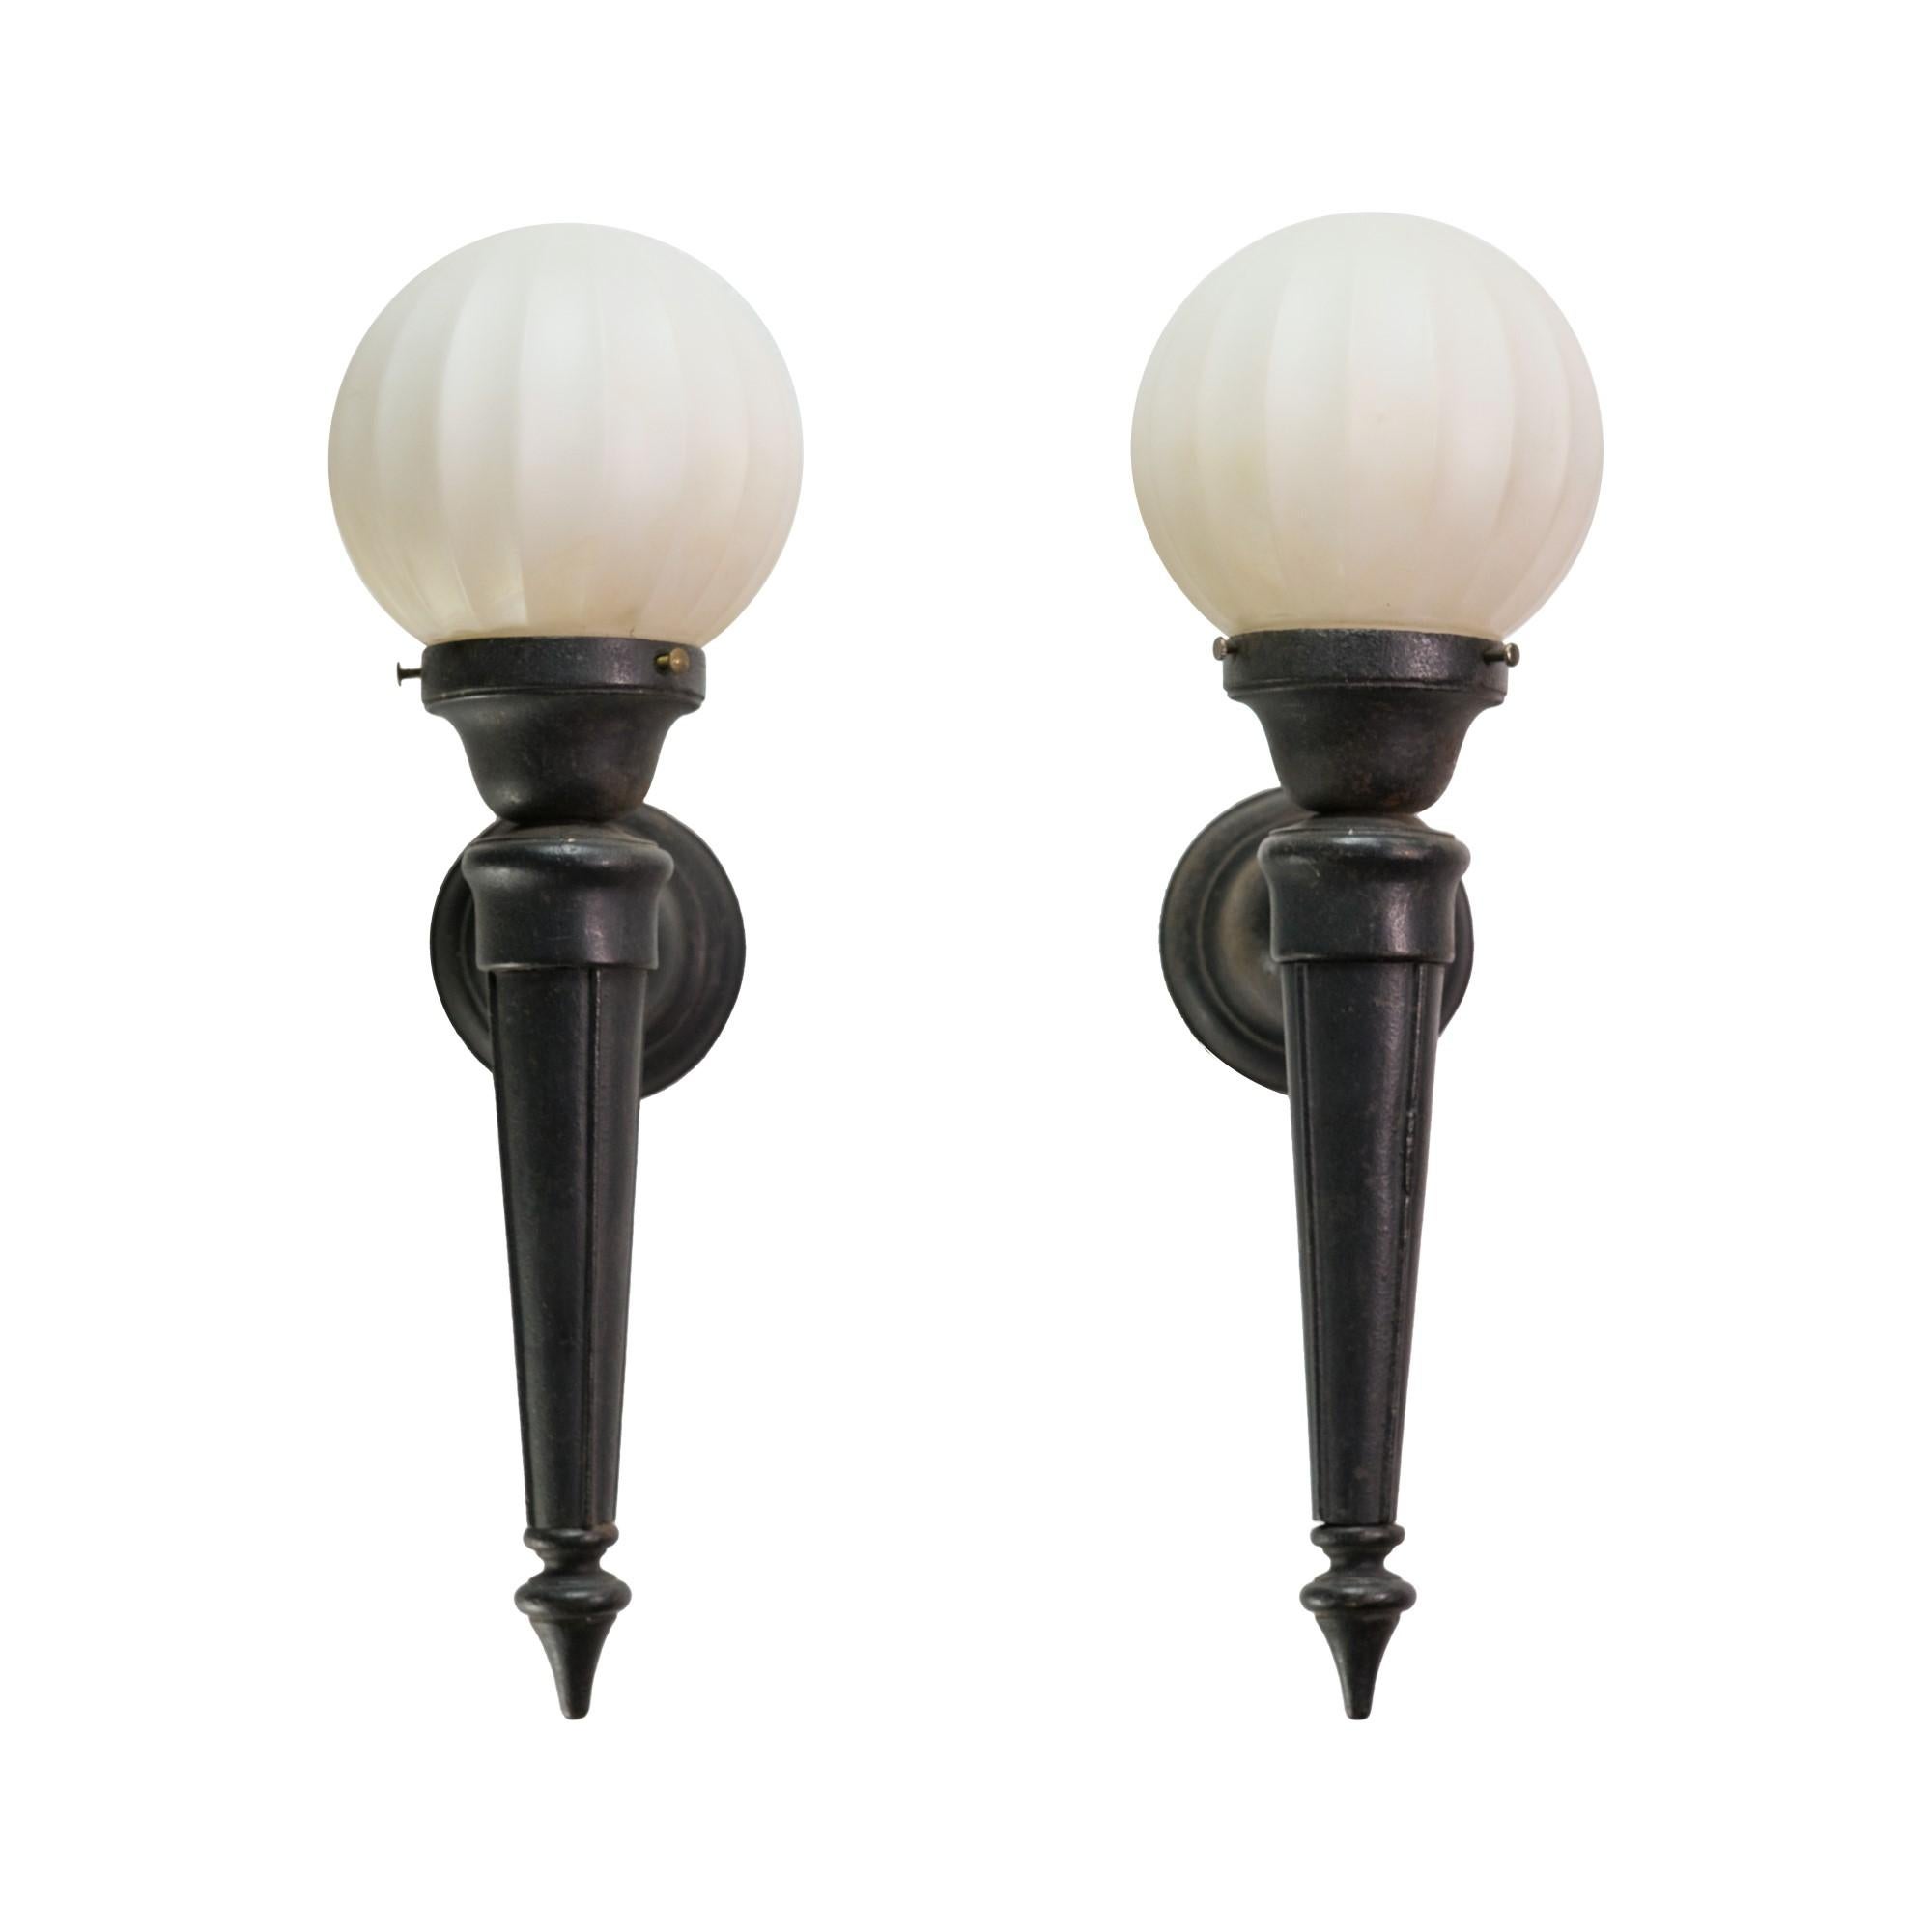 Antique pair of cast iron exterior sconces with fluted globe with frosted glass. These 1920's sconces are original and have a natural patina. Price includes restoration. Priced as a pair.